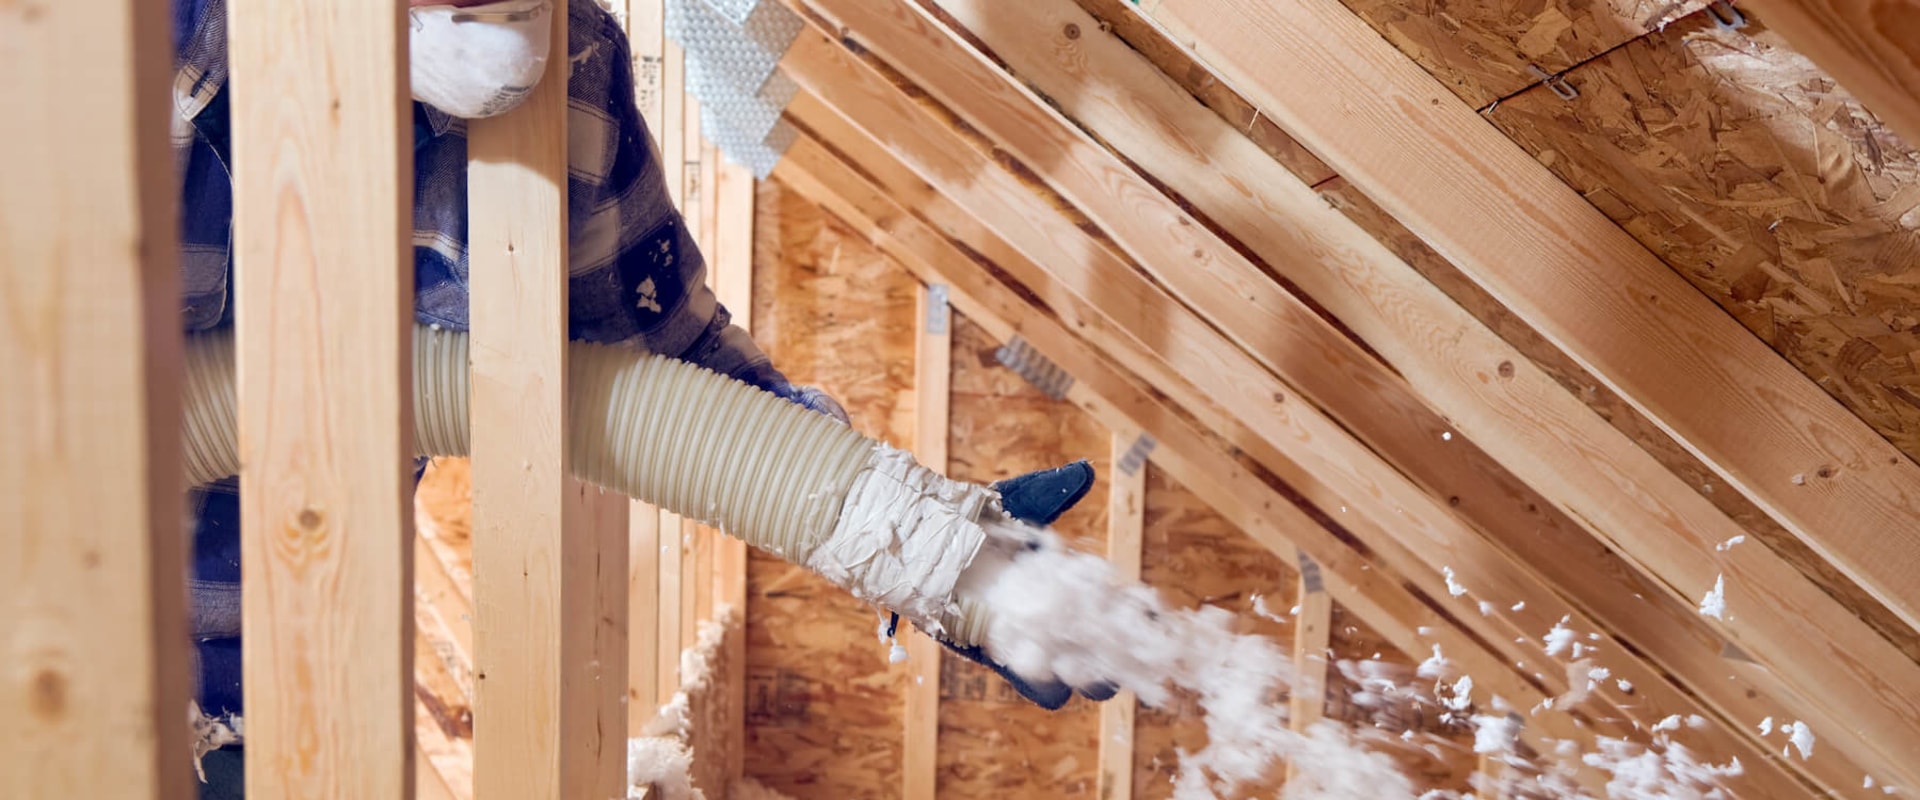 Does Attic Insulation Help with Cooling? - An Expert's Perspective